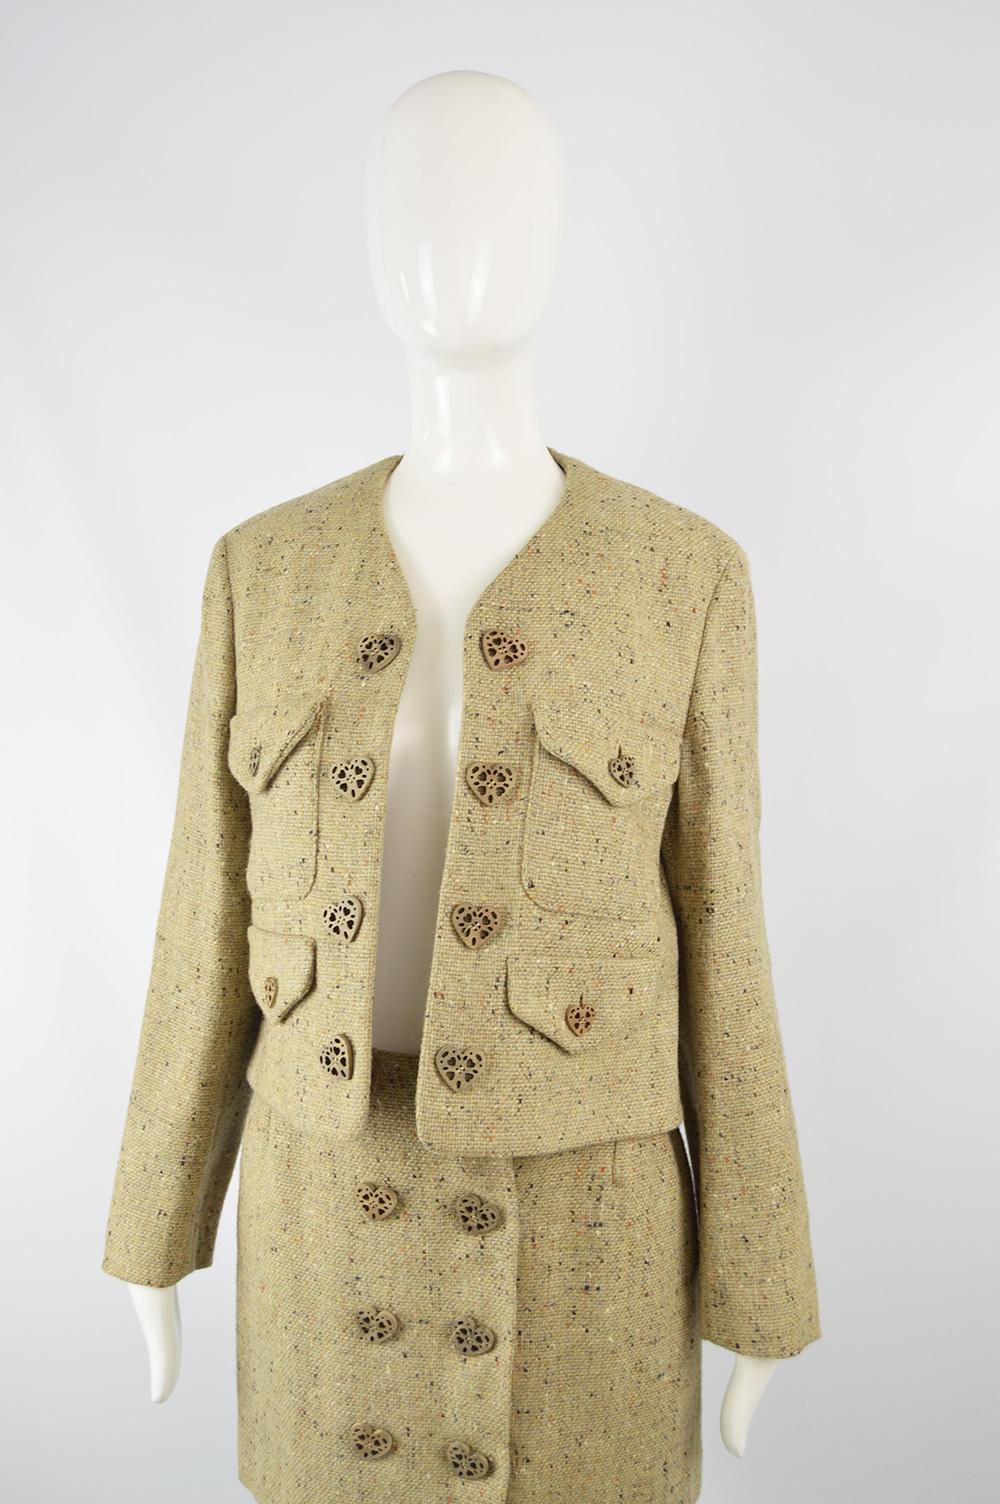 Beige Moschino Vintage Wool Tweed 2 Piece Jacket & Skirt Suit with Heart Button, 1990s For Sale